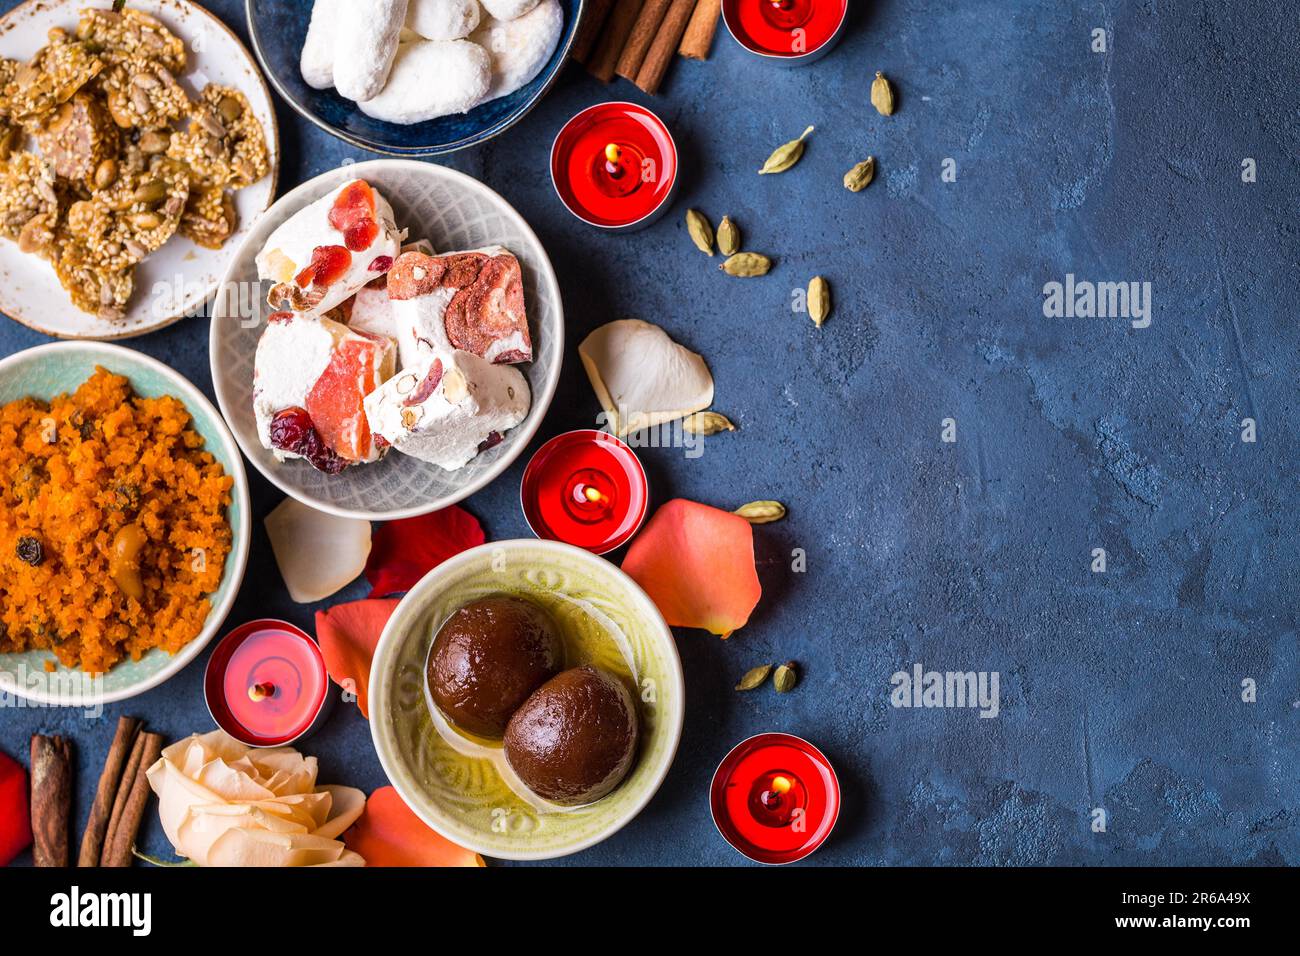 Indian Diwali celebratory background with traditional sweets. Gulab jamun, carrot halwa, snacks with candles, flowers. Assorted indian desserts. Stock Photo